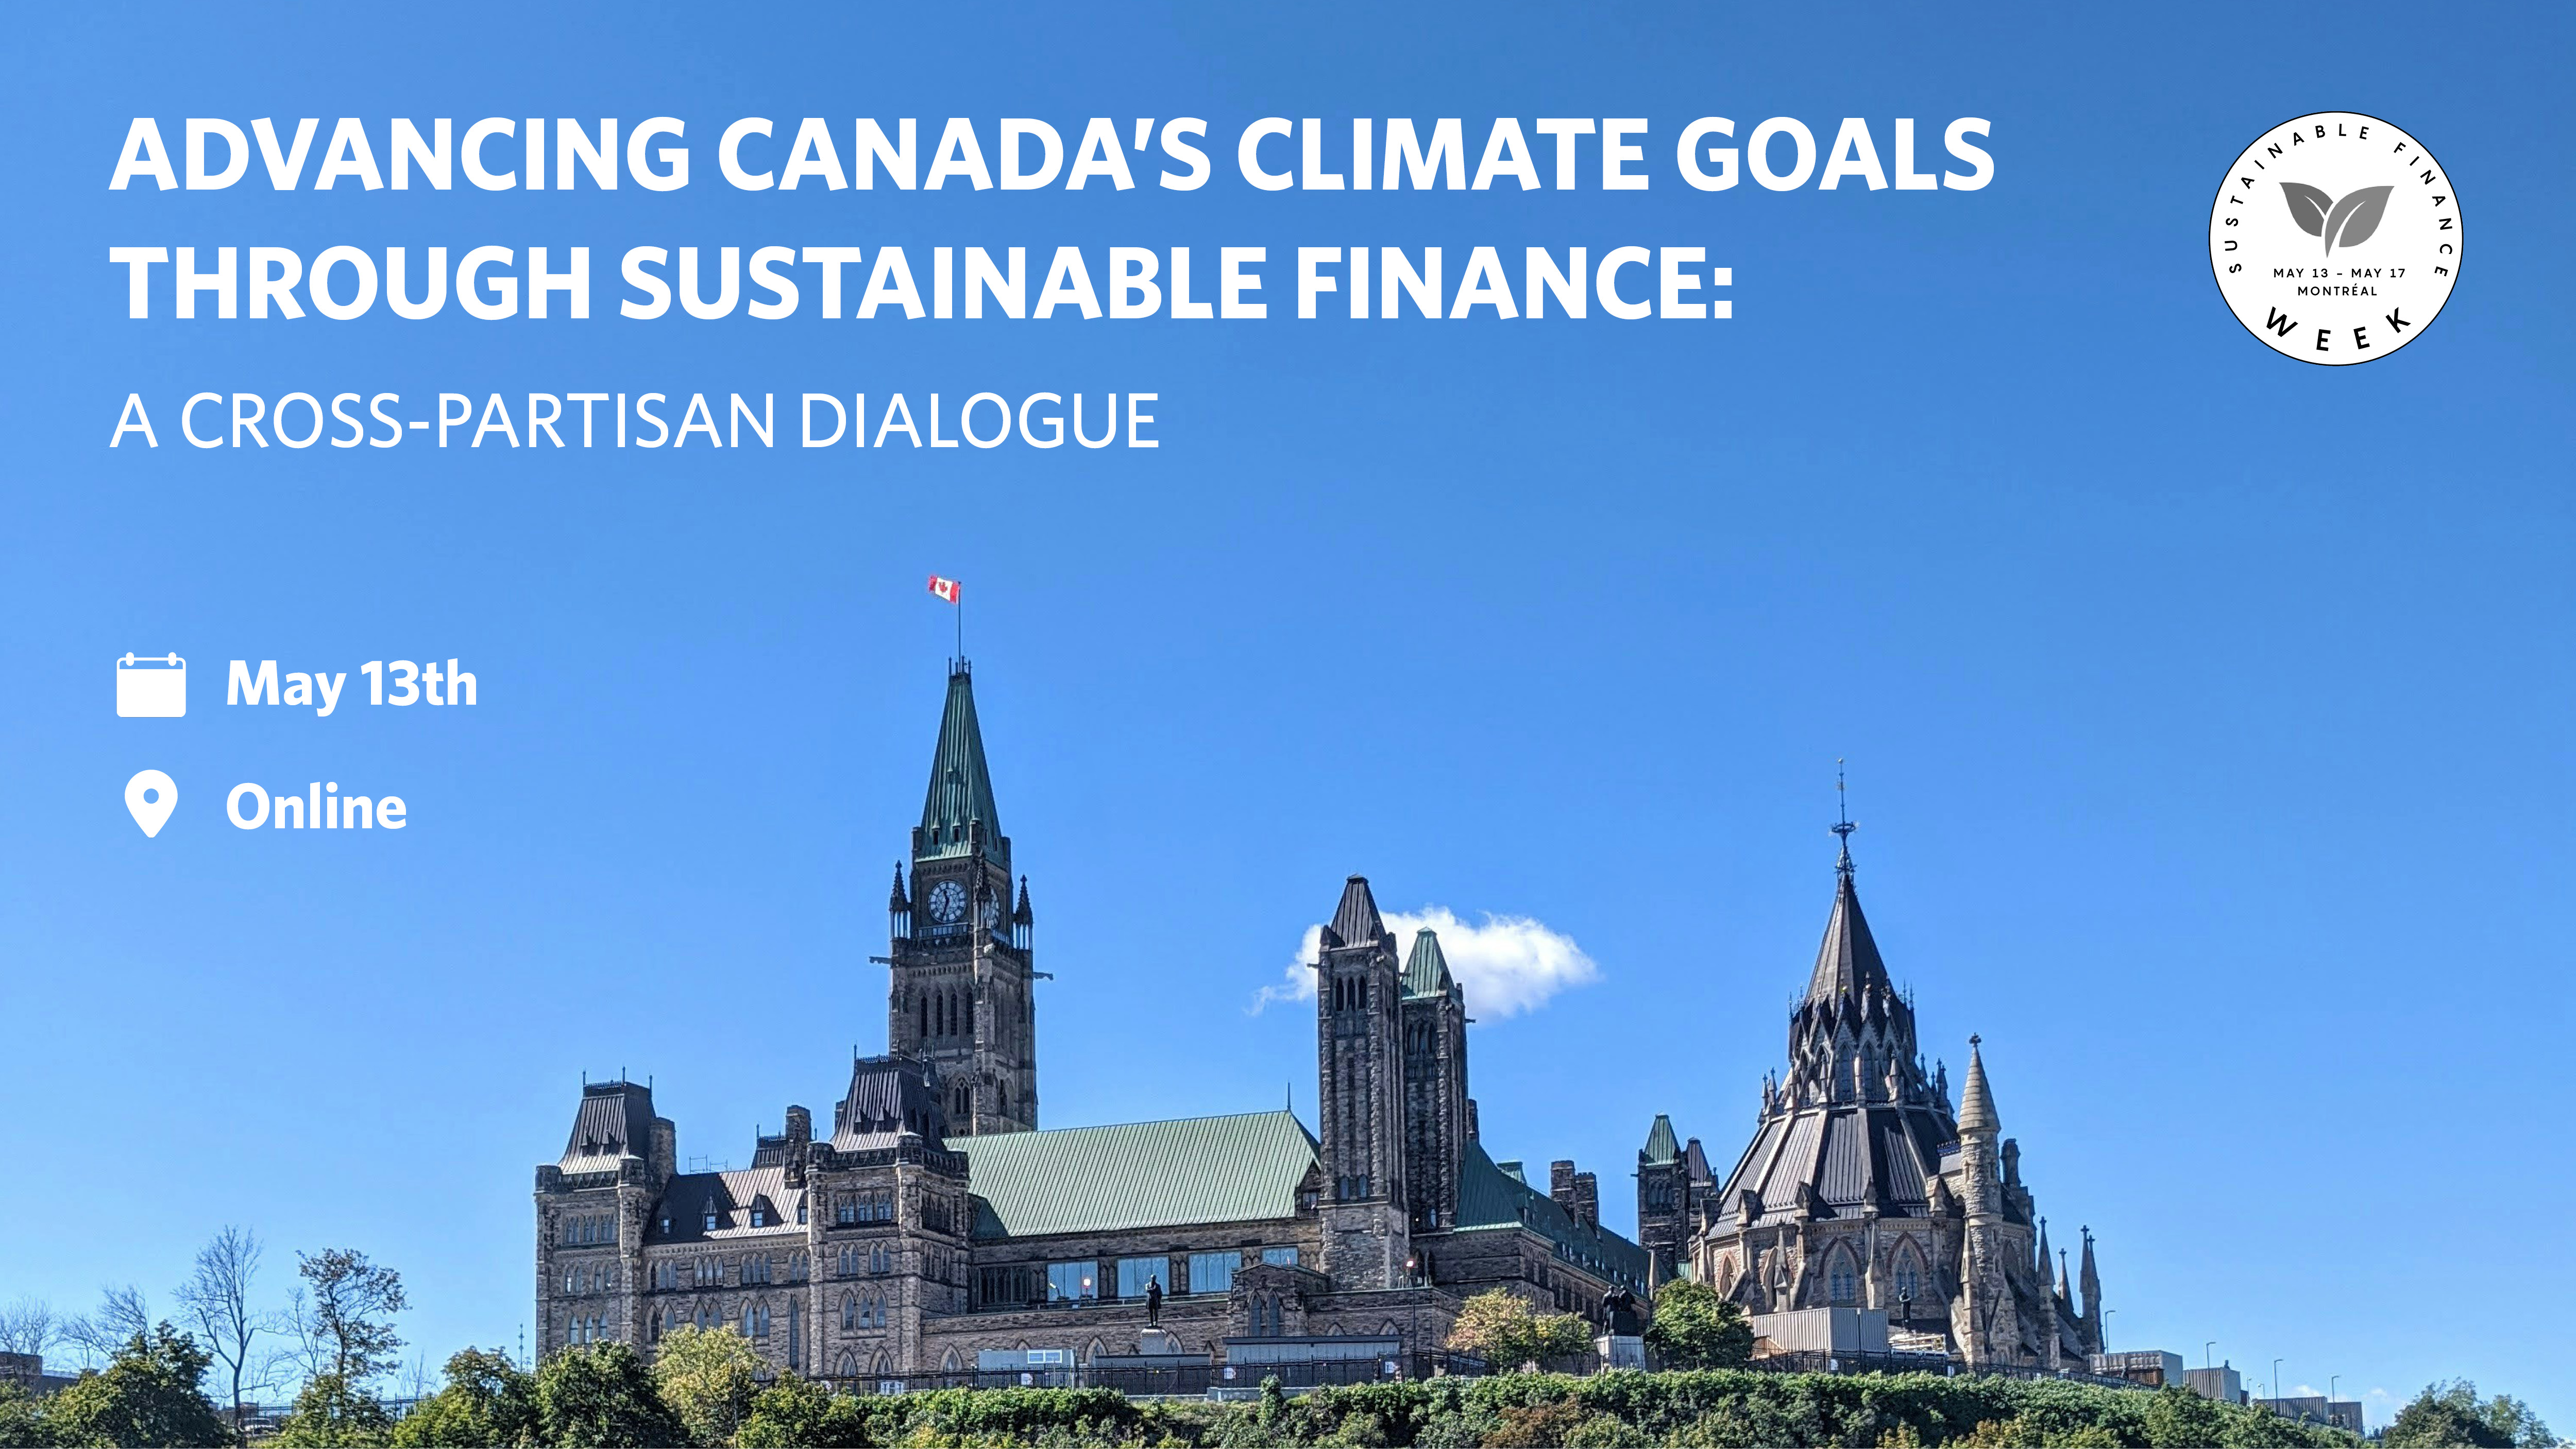 Advancing Canada’s climate goals through sustainable finance: A cross-partisan dialogue